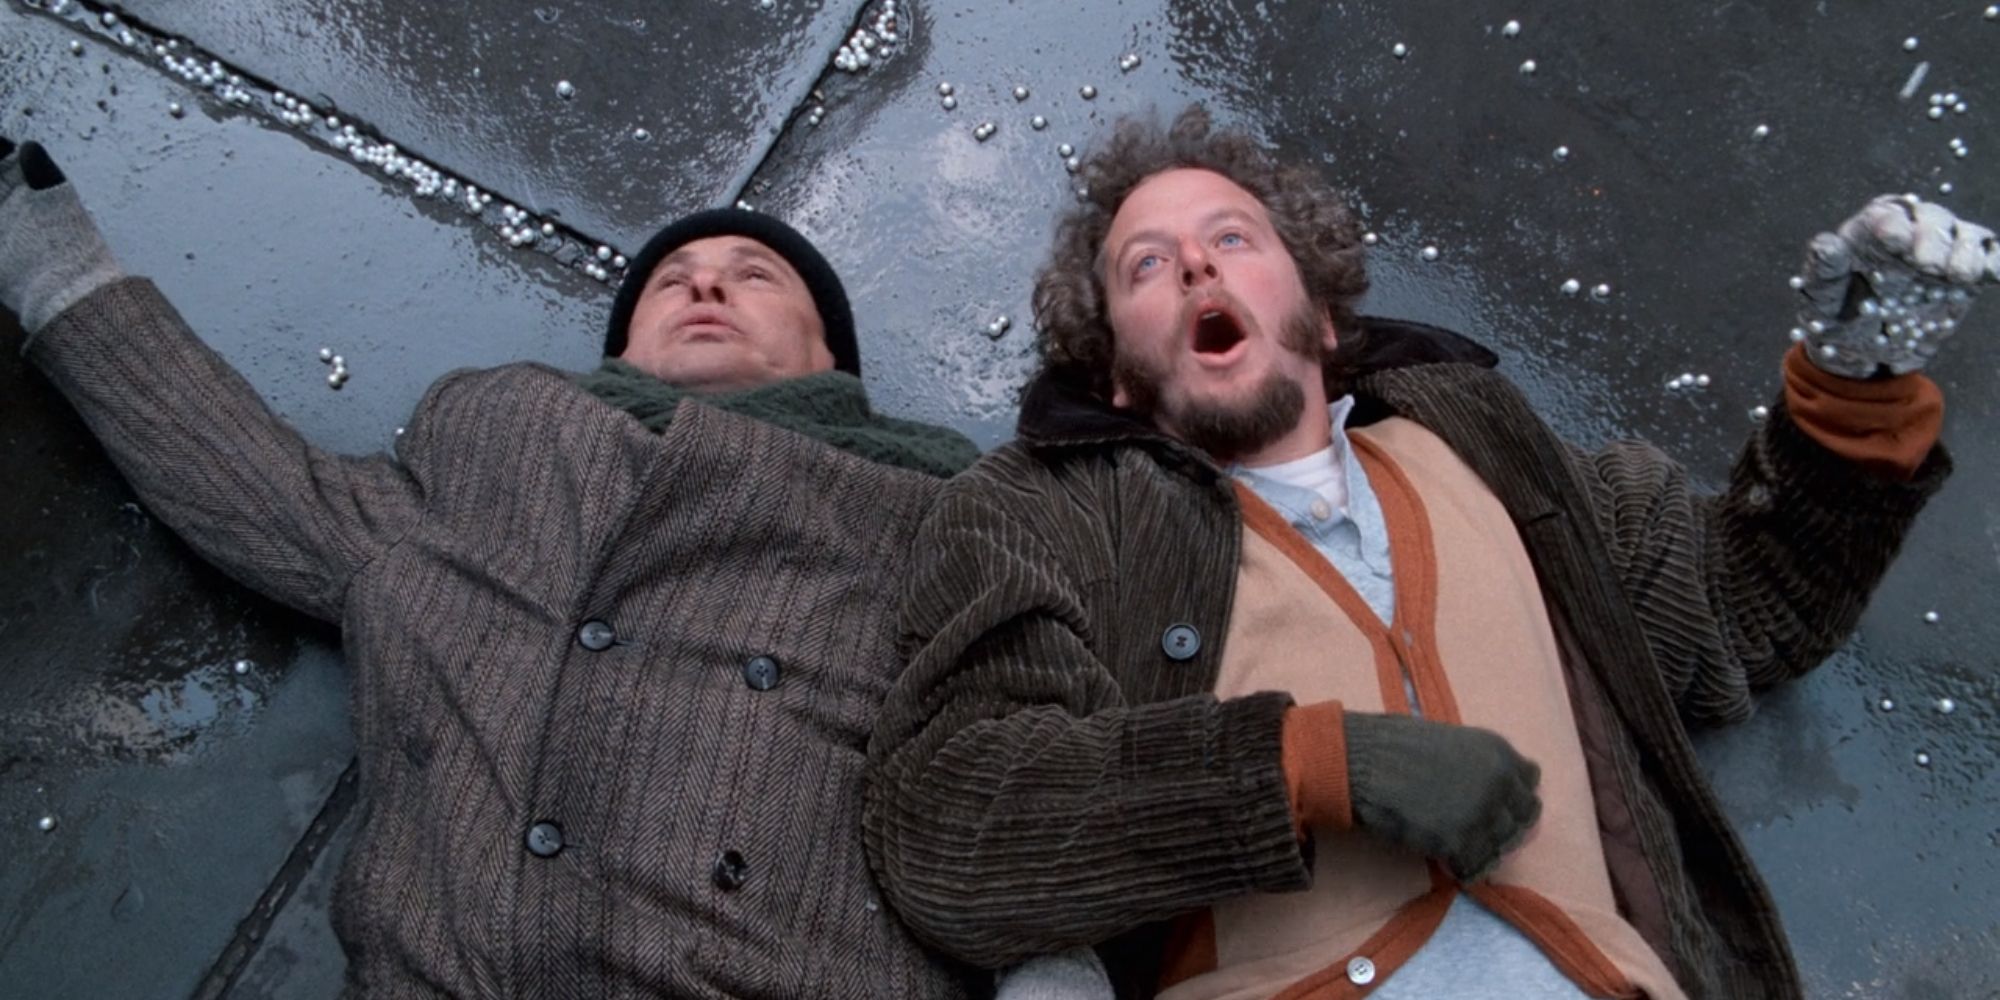 Harry and Marv lying on the sidewalk with marbles in Home Alone 2 Lost In New York (1991)